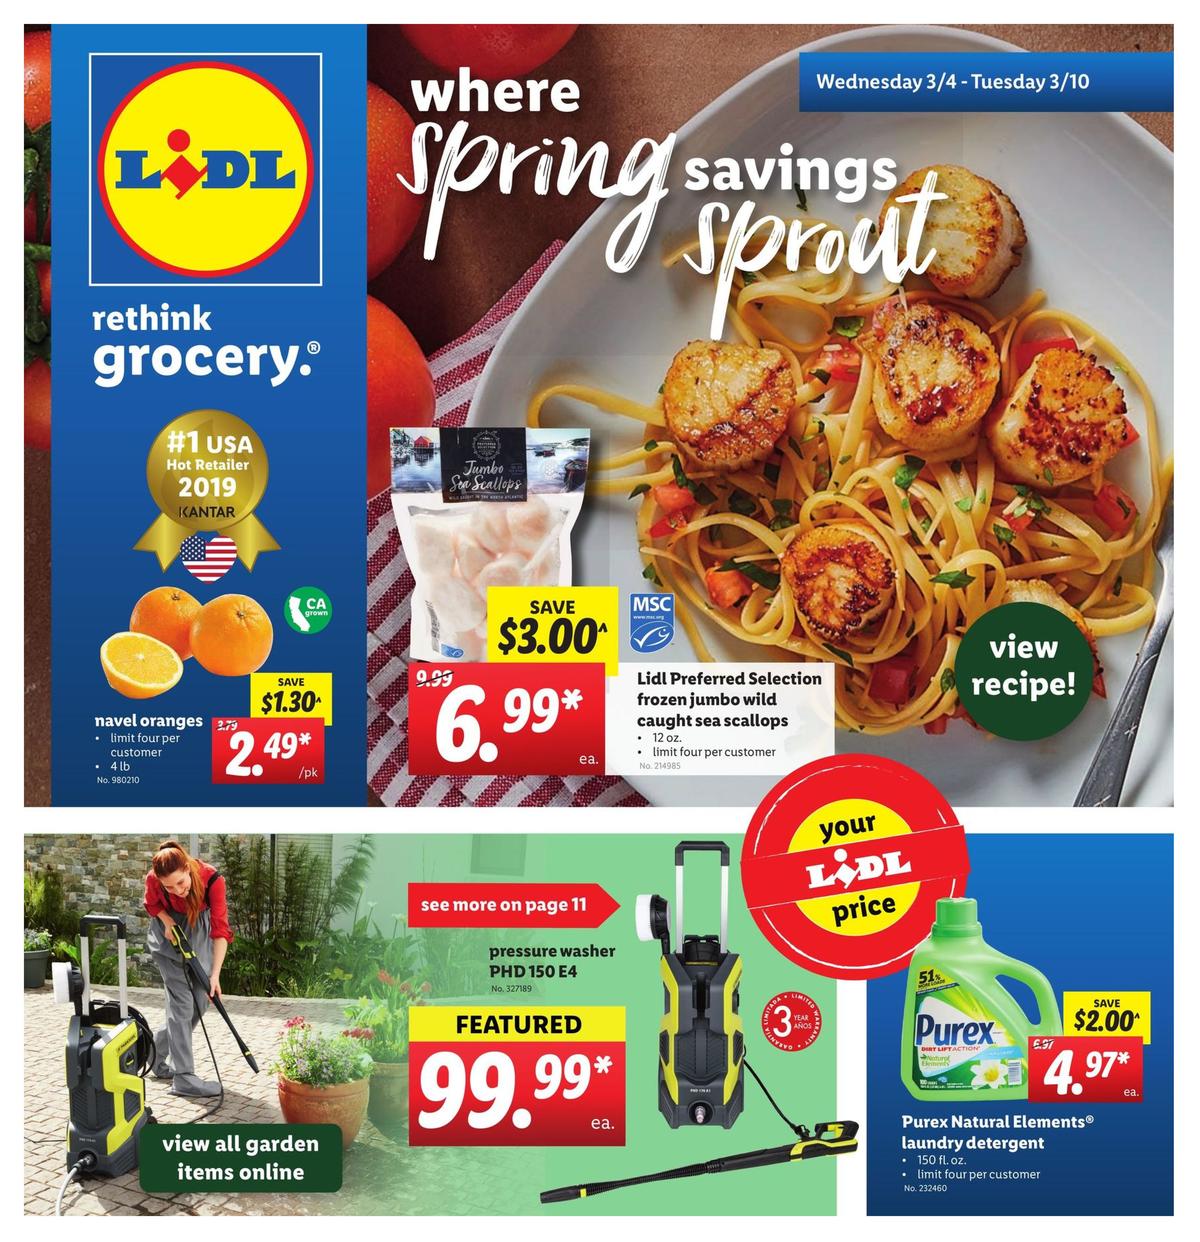 LIDL US Weekly Ad & Specials from March 4